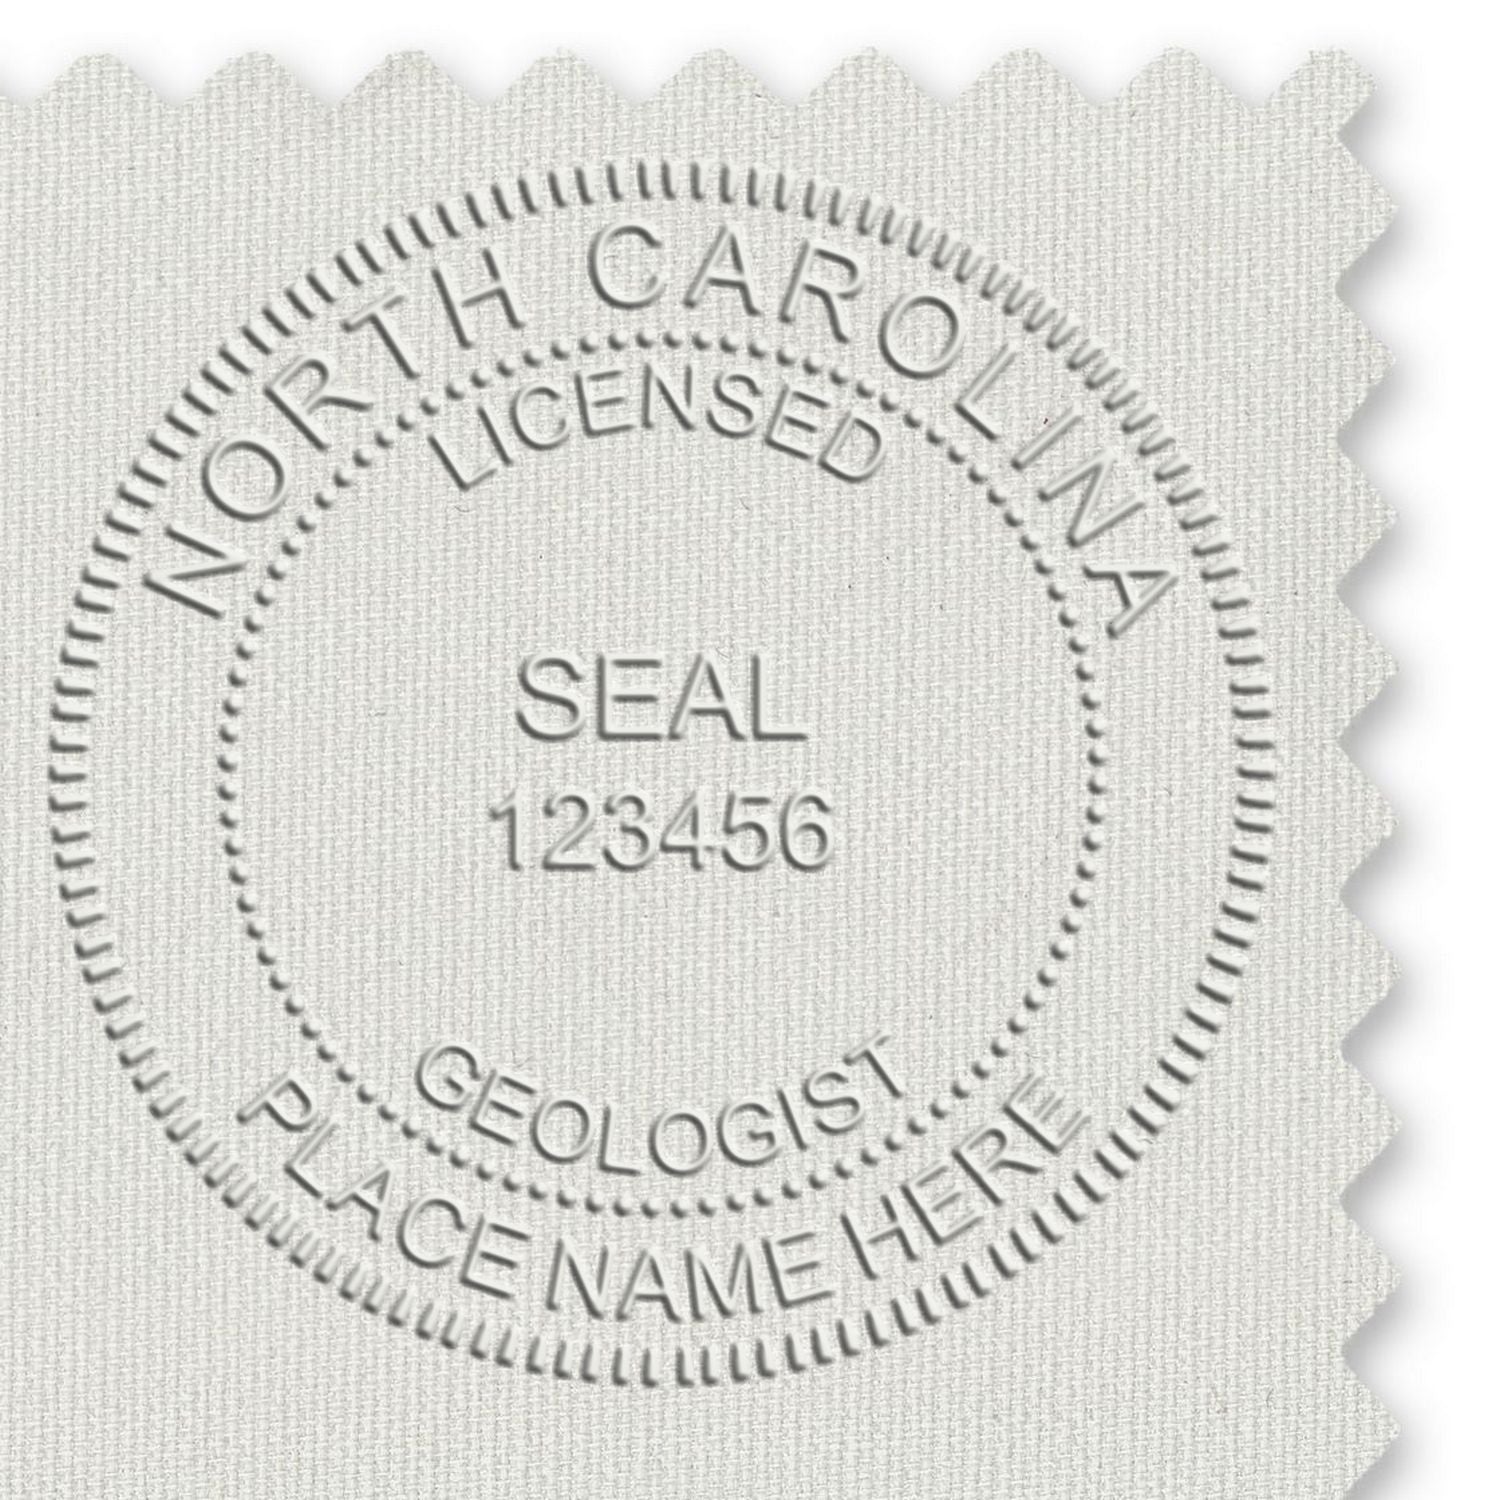 A lifestyle photo showing a stamped image of the Heavy Duty Cast Iron North Carolina Geologist Seal Embosser on a piece of paper